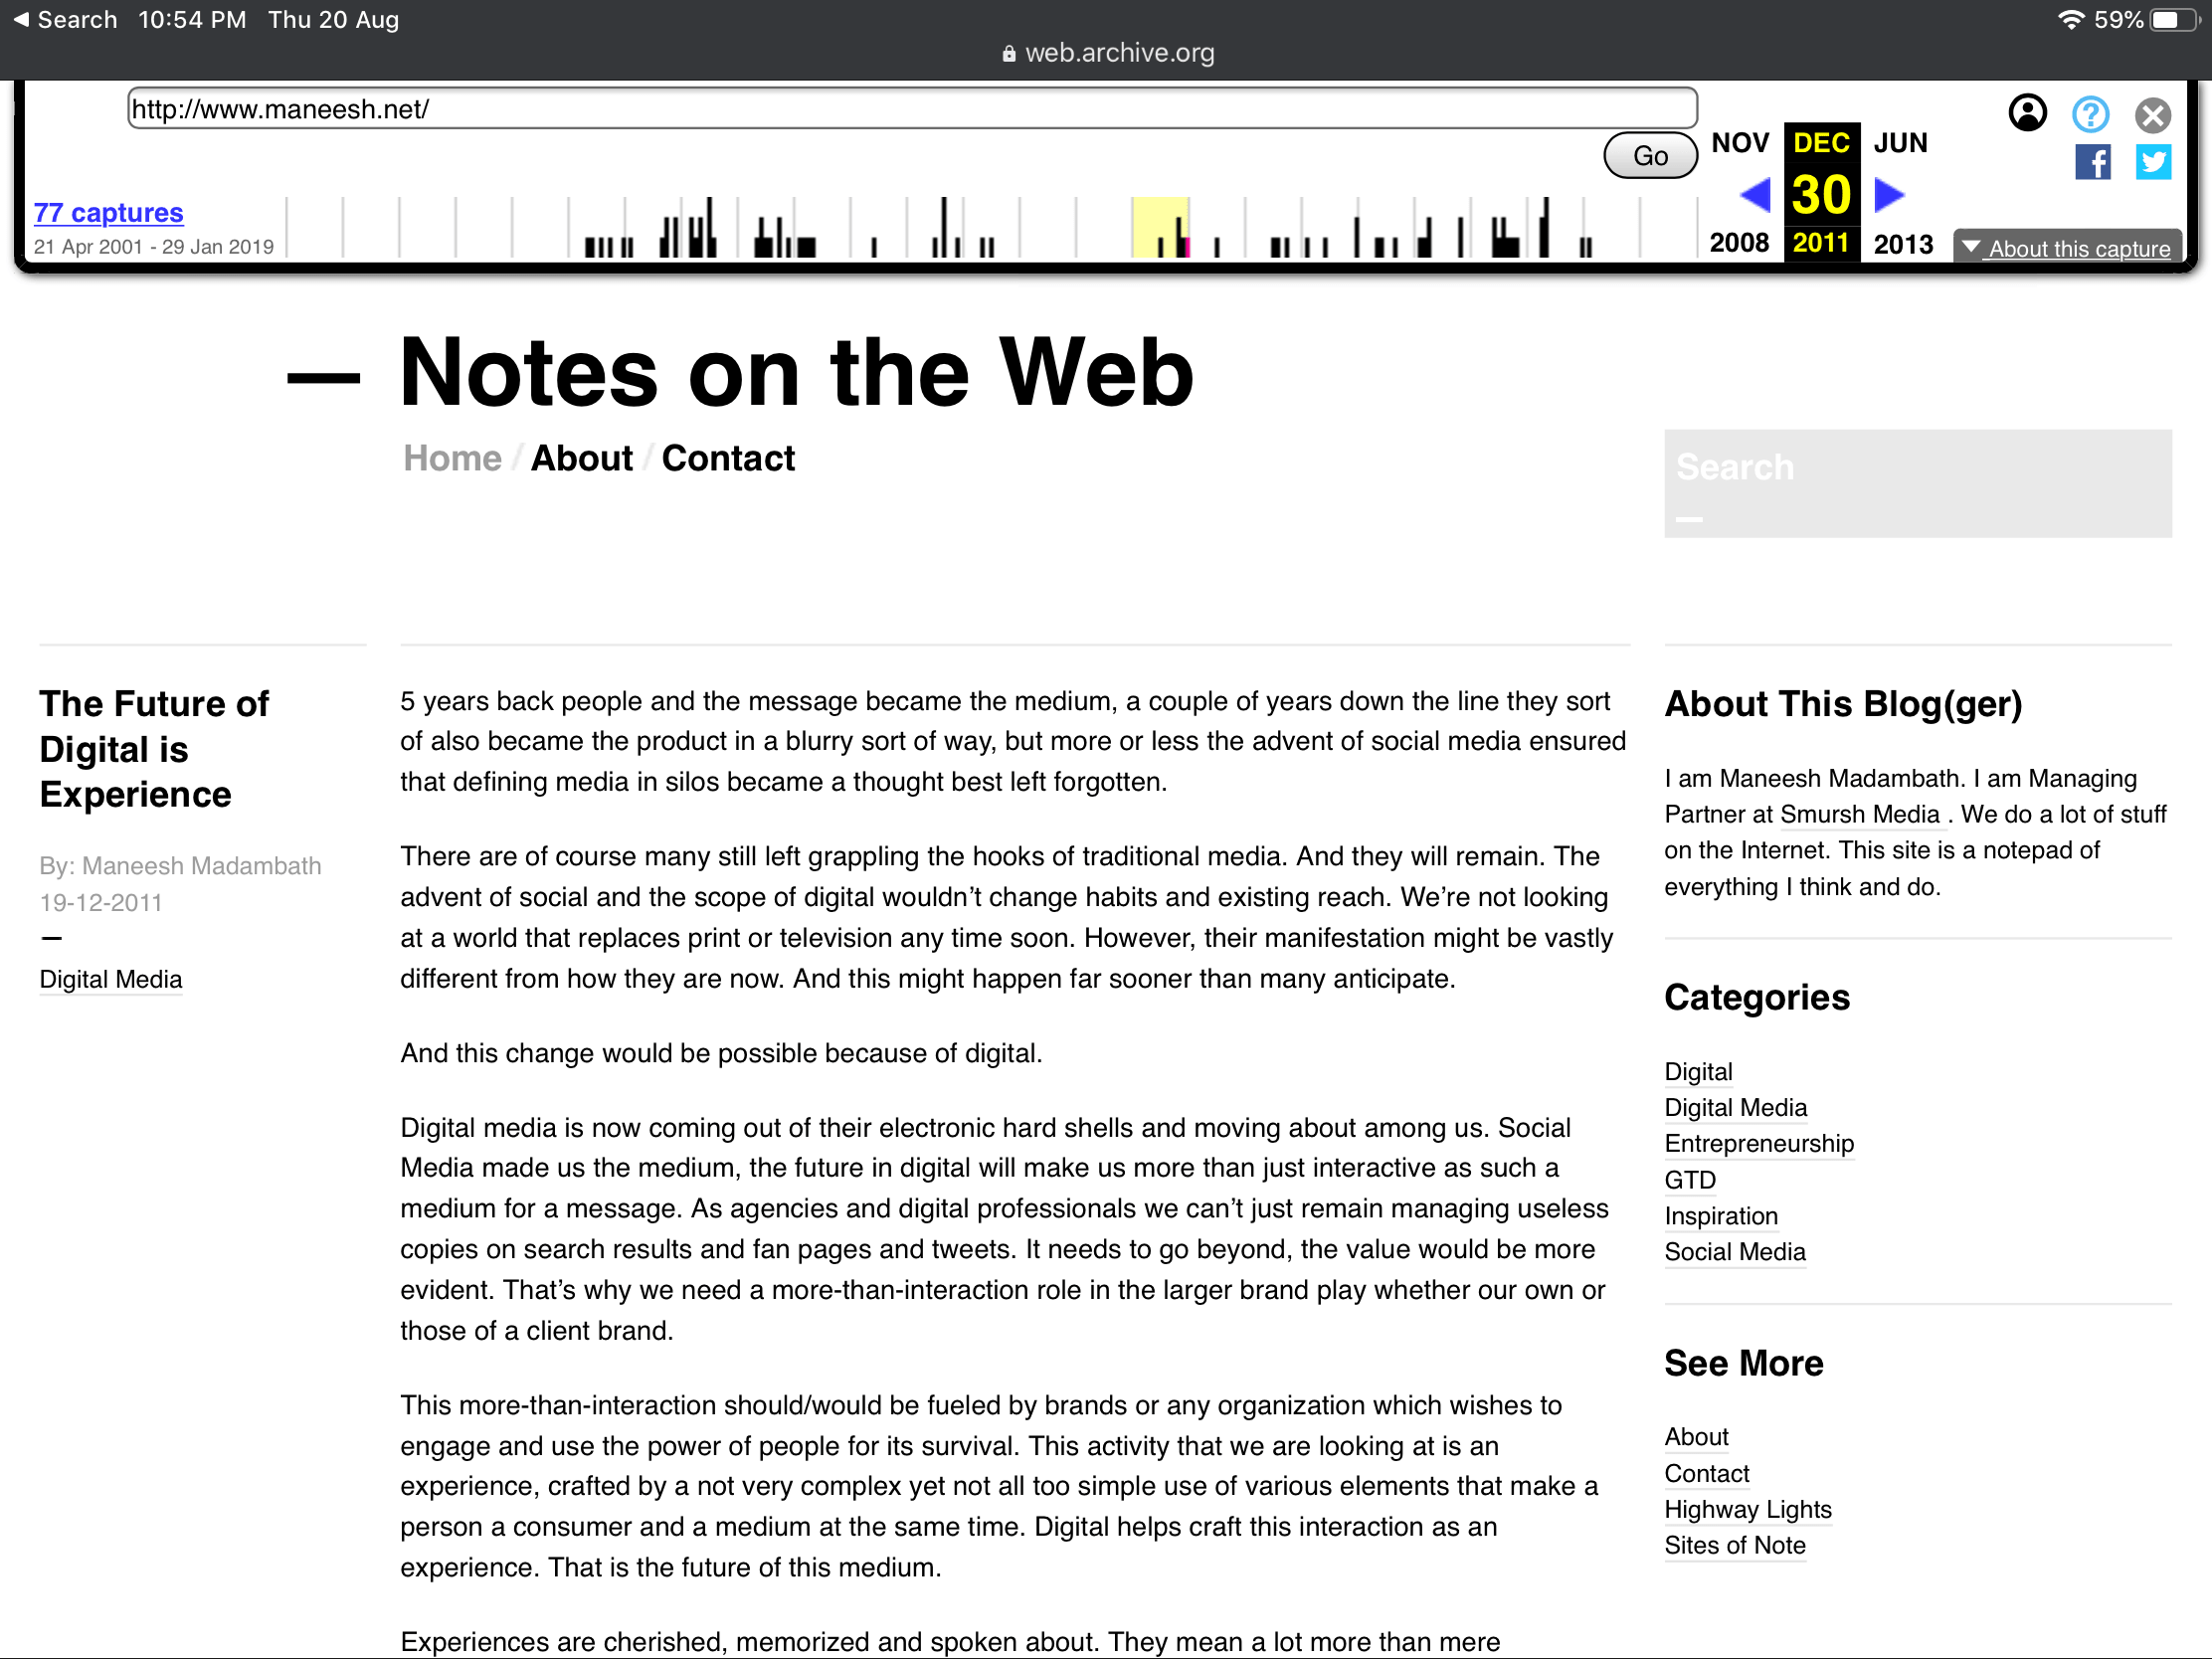 Notes on the Web Ver 1.0